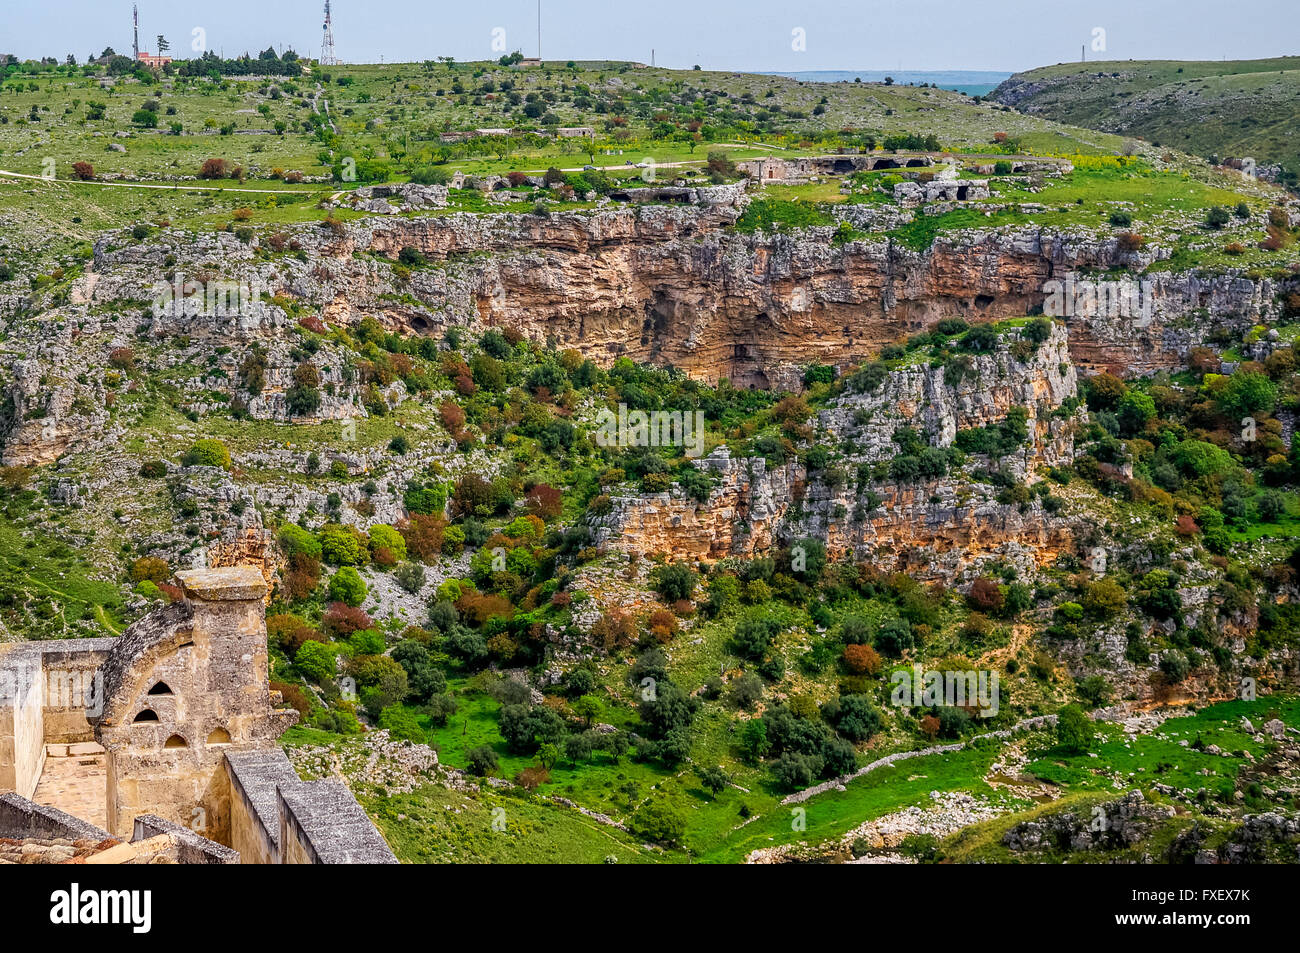 View of the Park of the Rupestrian Churches and the Gravina Valley, from the town of Matera, Basilicata, Italy Stock Photo